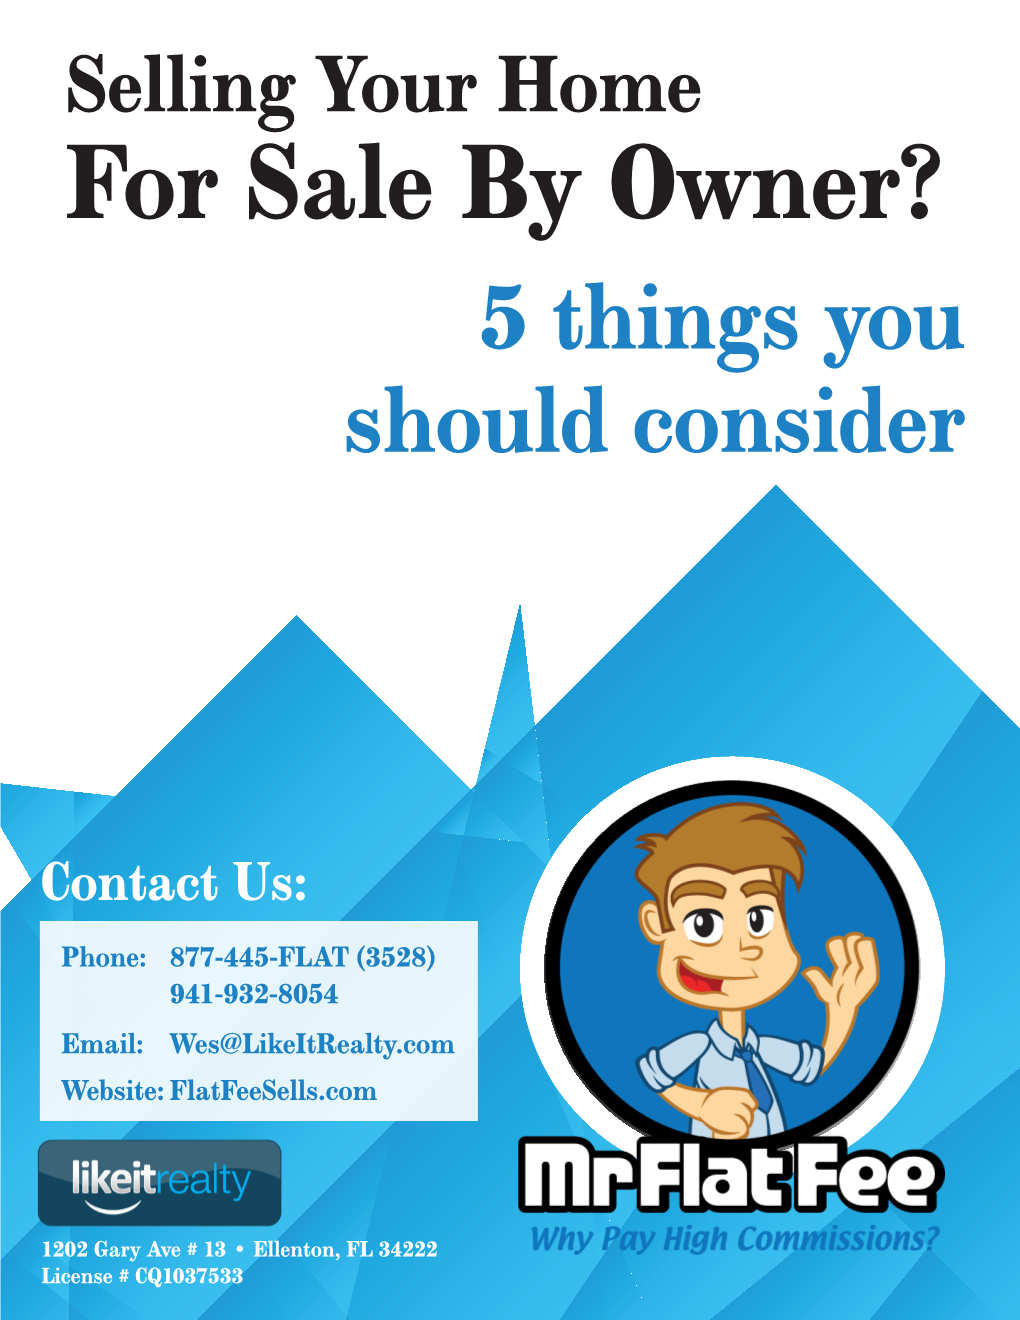 For Sale by Owner? 5 Things You Should Consider